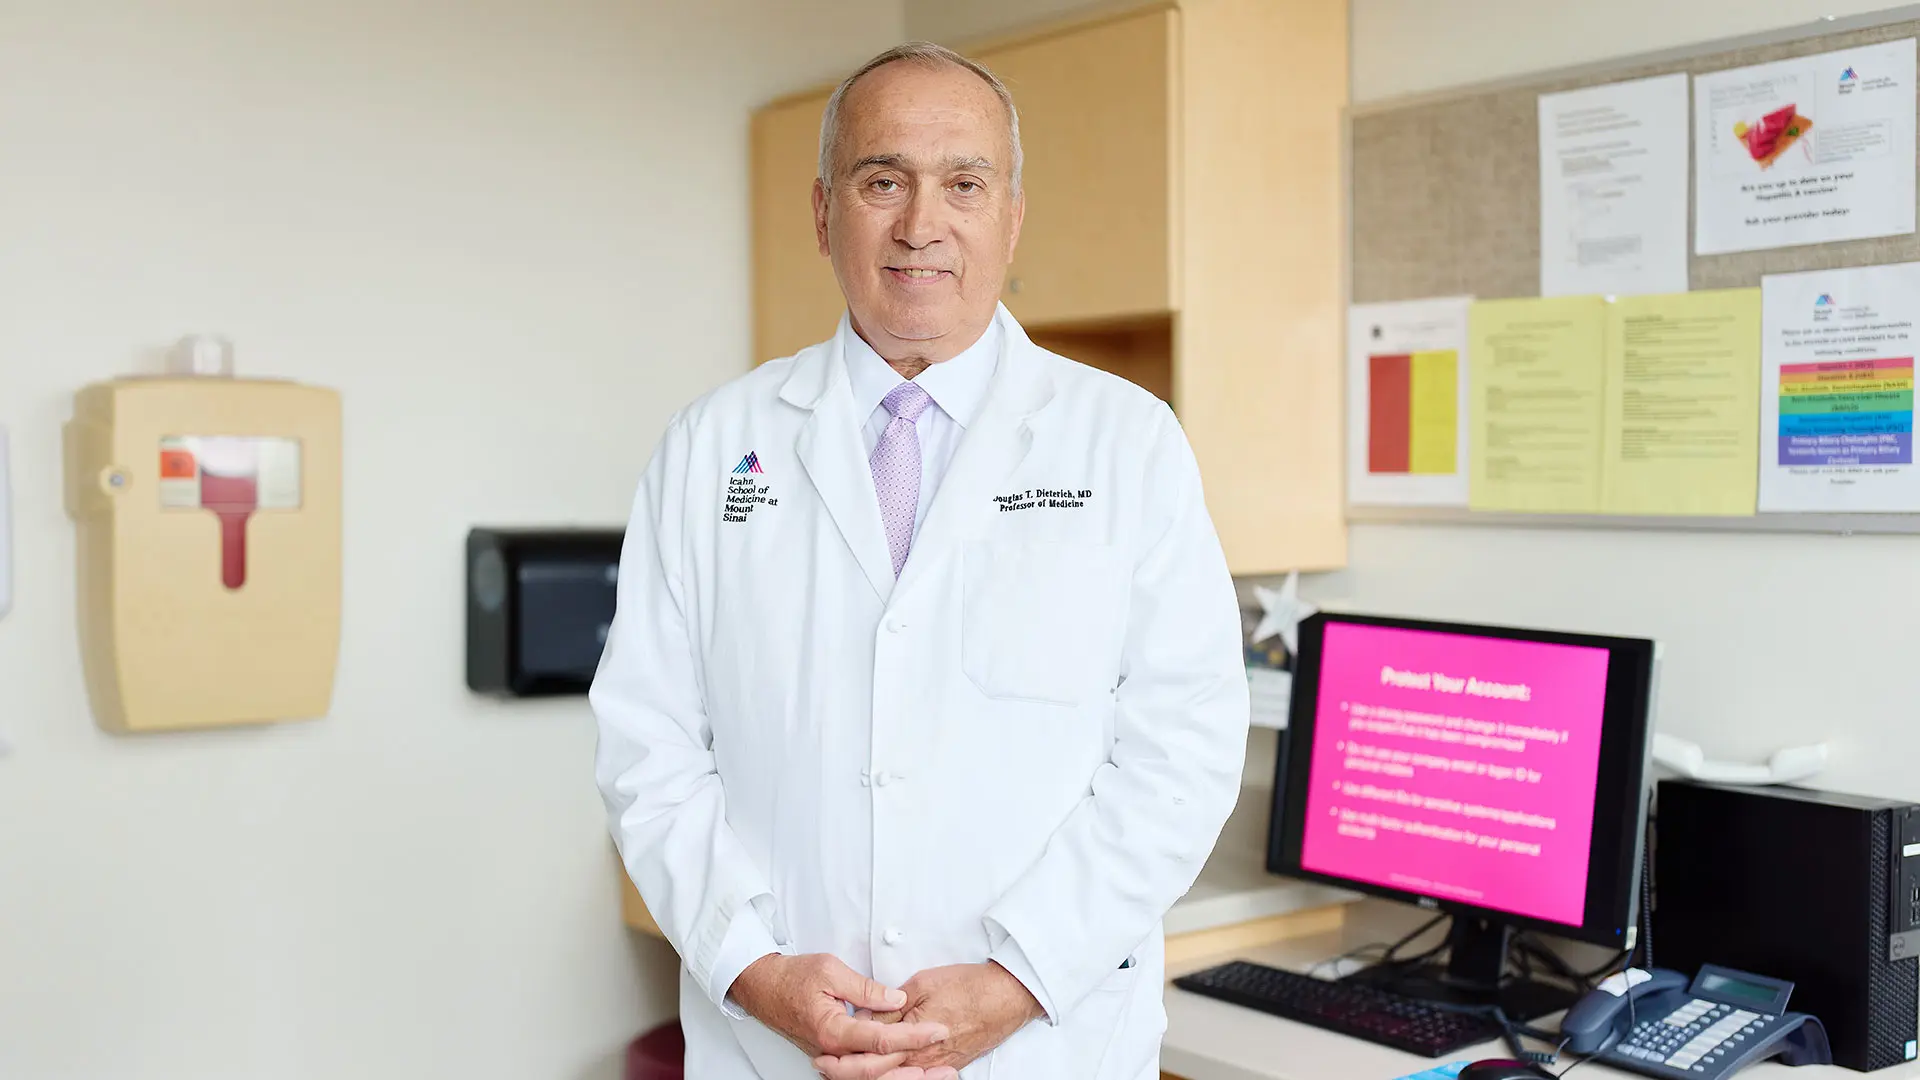 Douglas Dieterich, MD, is leading an effort to test all Mount Sinai primary care patients for hepatitis B and the related hepatitis Delta virus.